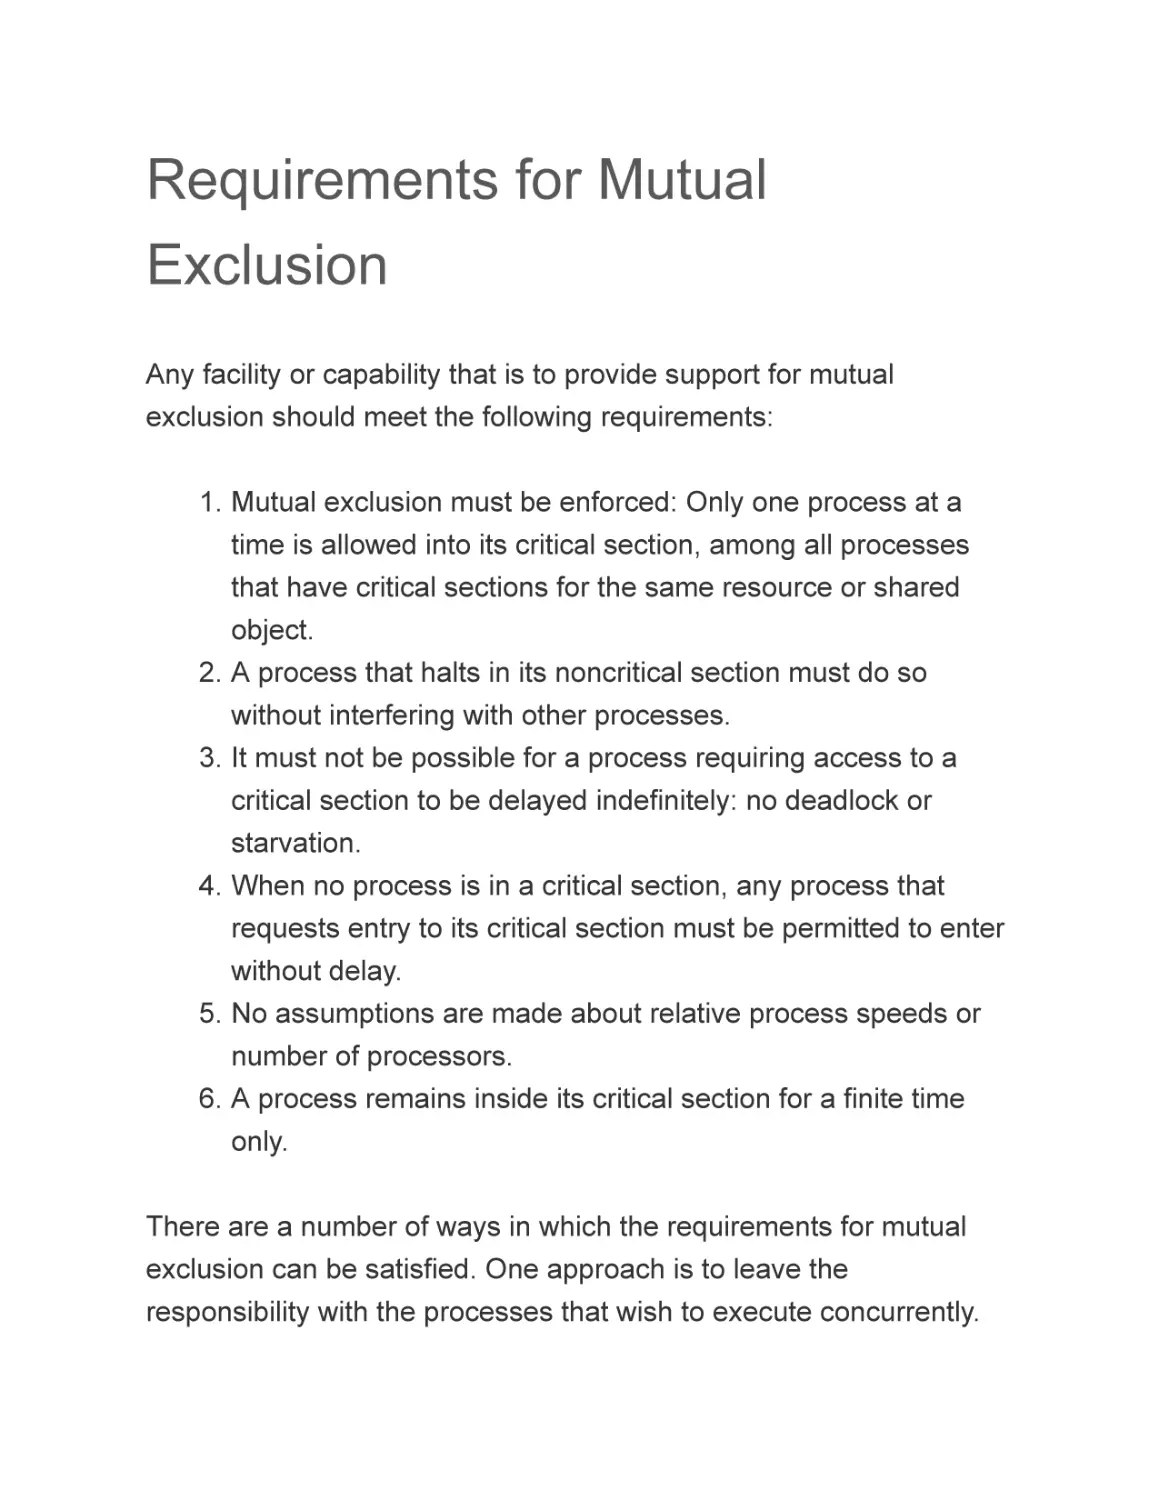 Requirements for Mutual Exclusion